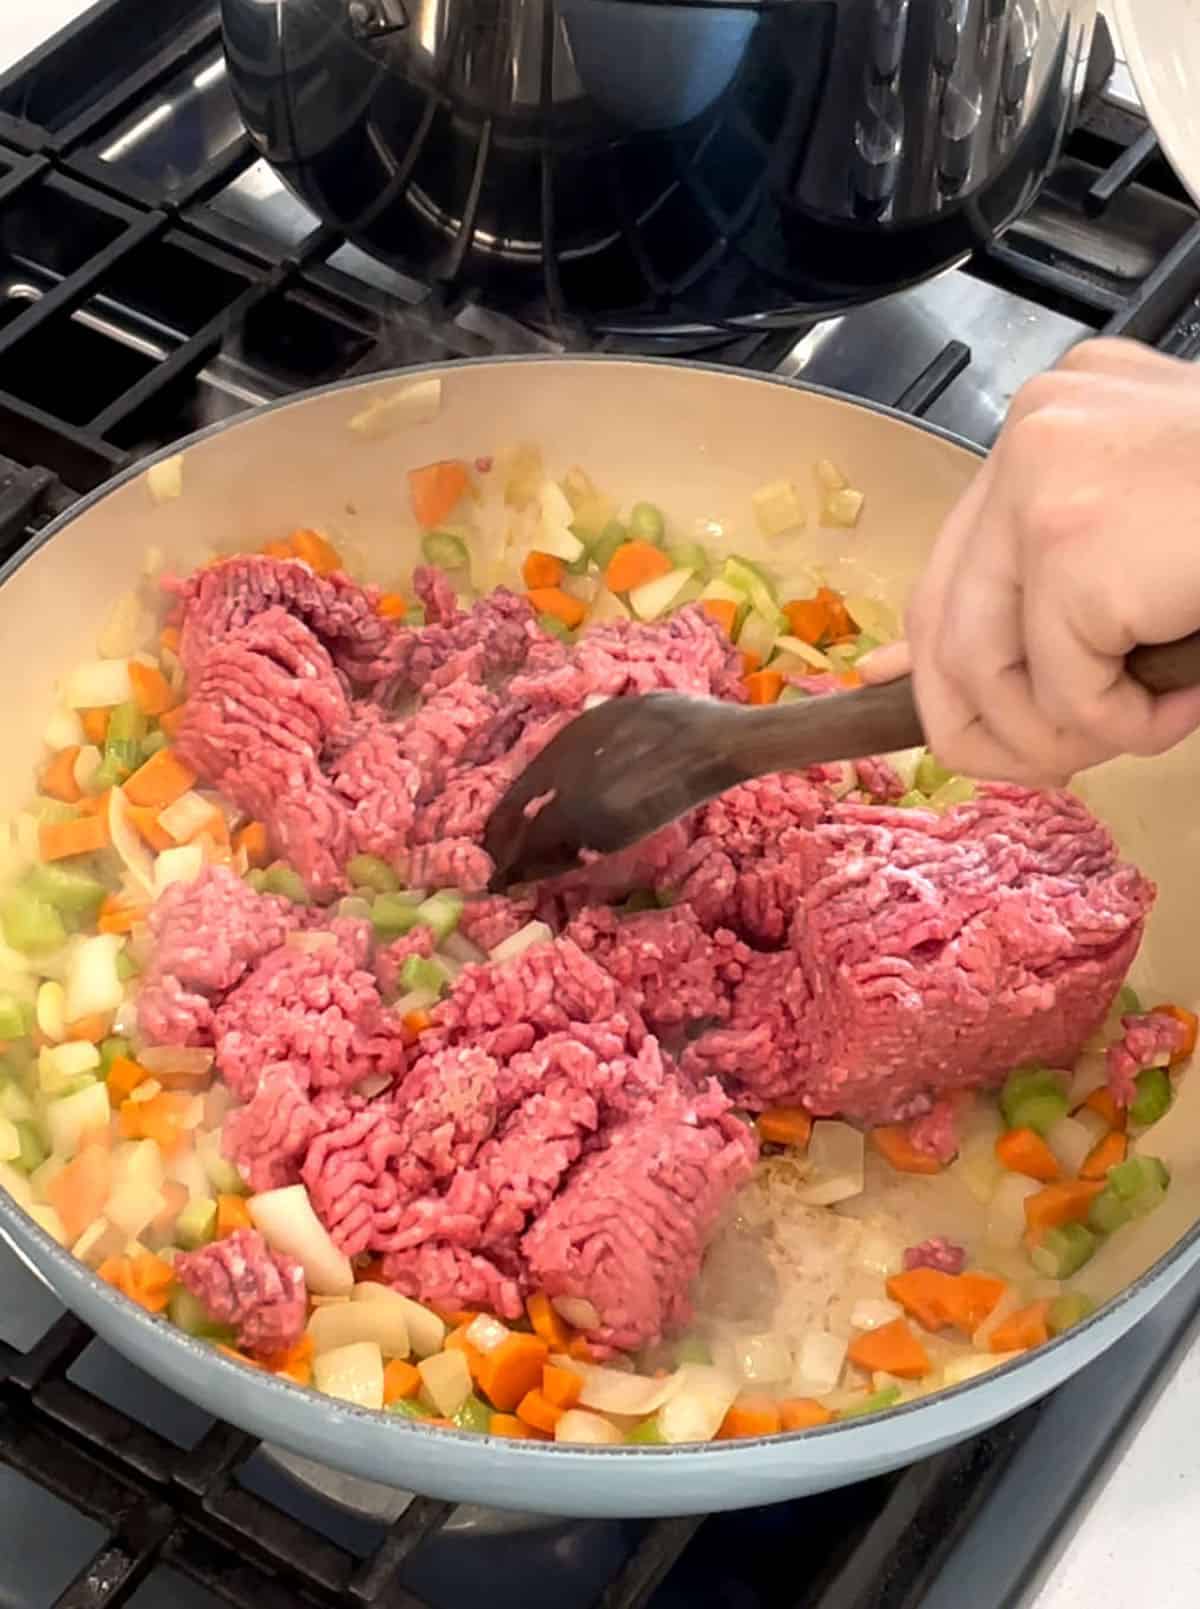 Large skillet with sautéed veggies and raw ground meat being added with a wooden spoon.